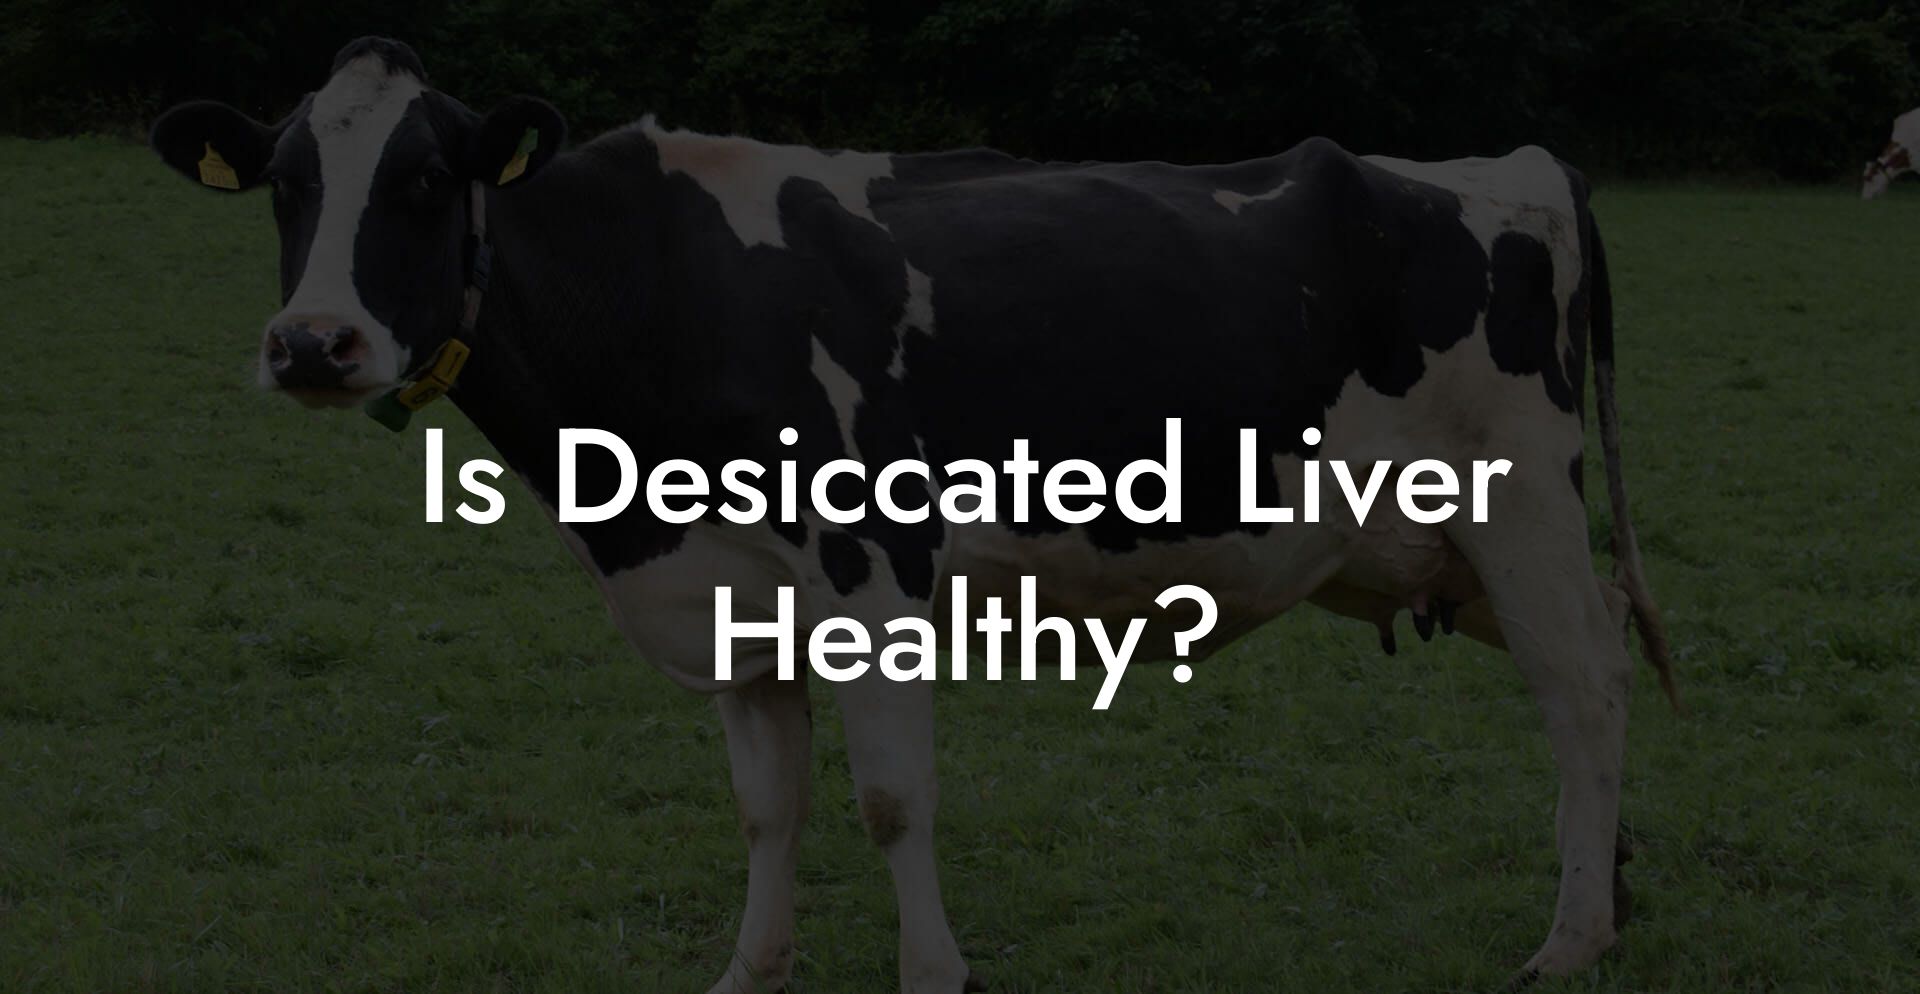 Is Desiccated Liver Healthy?